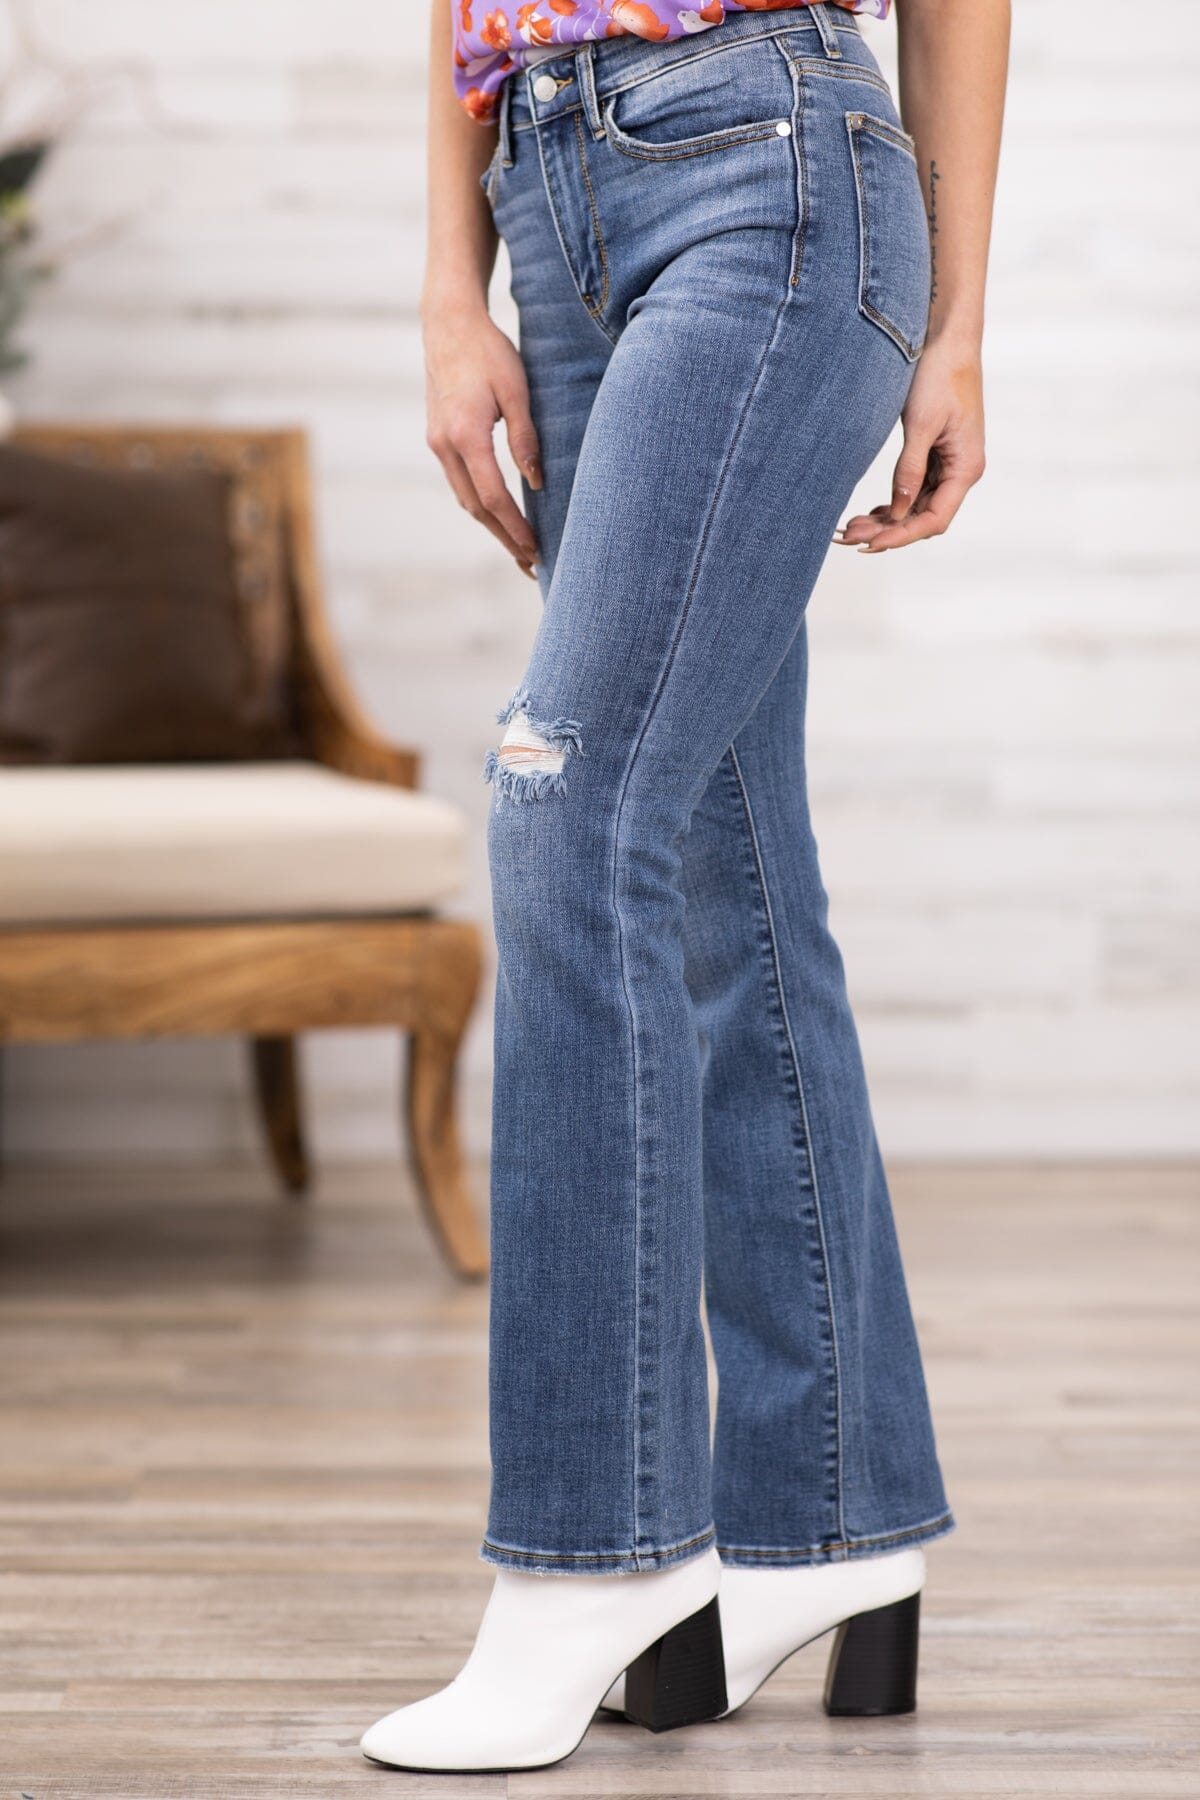 Judy Blue Mid Rise Distressed Bootcut Jeans - Filly Flair